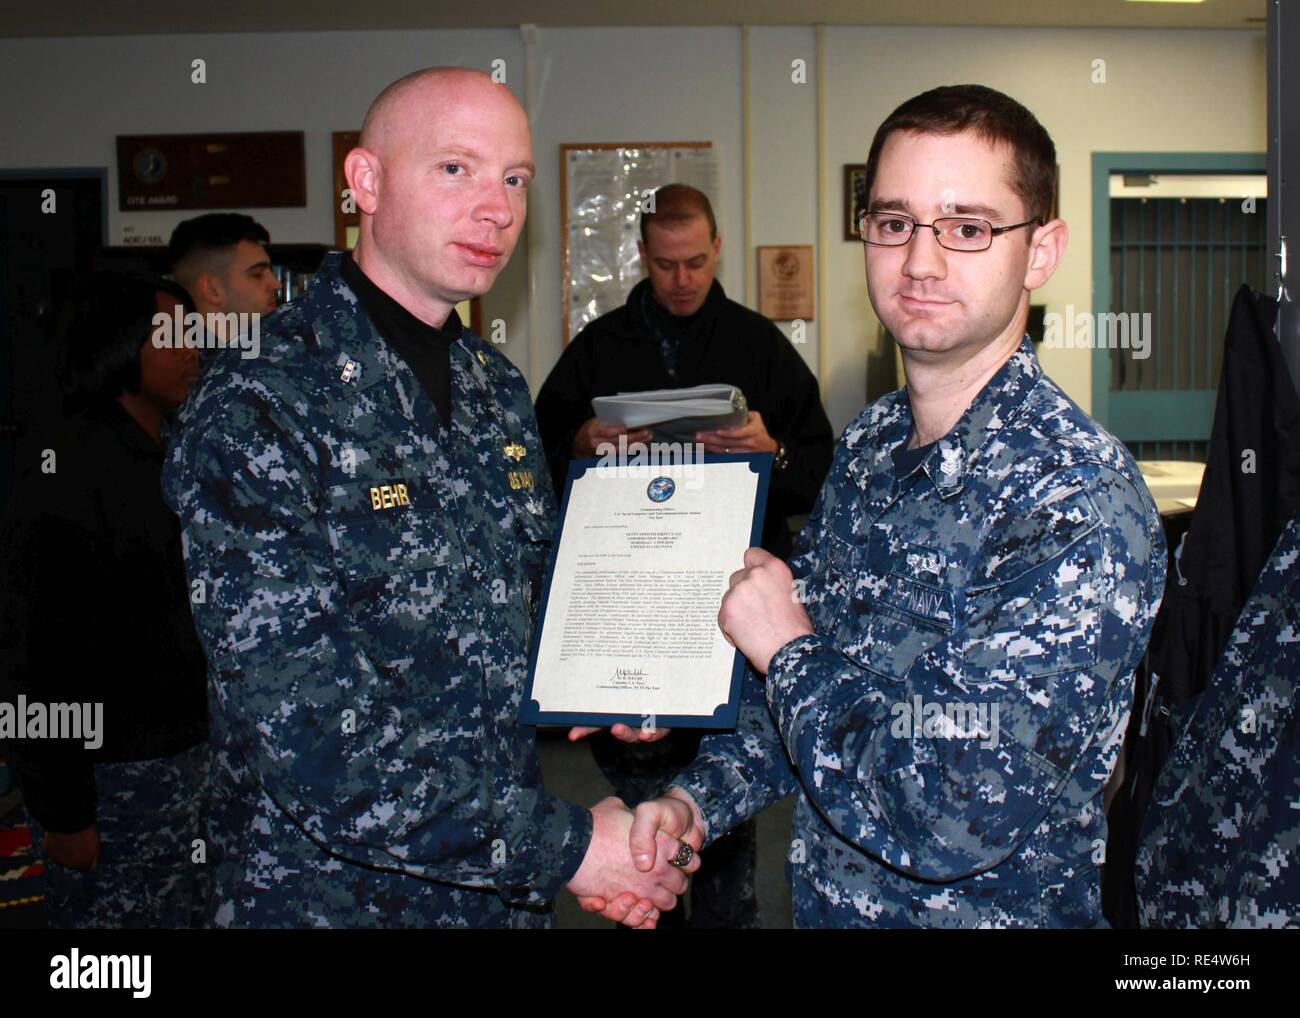 2 MISAWA, Japan (Nov. 30, 2016) Petty Officer 1st Class Marshall Folsom,  attached to Naval Computer and Telecommunications Station Far East  Detachment Misawa (NCTSFE), from Kent, Wash., receives a Navy and Marine